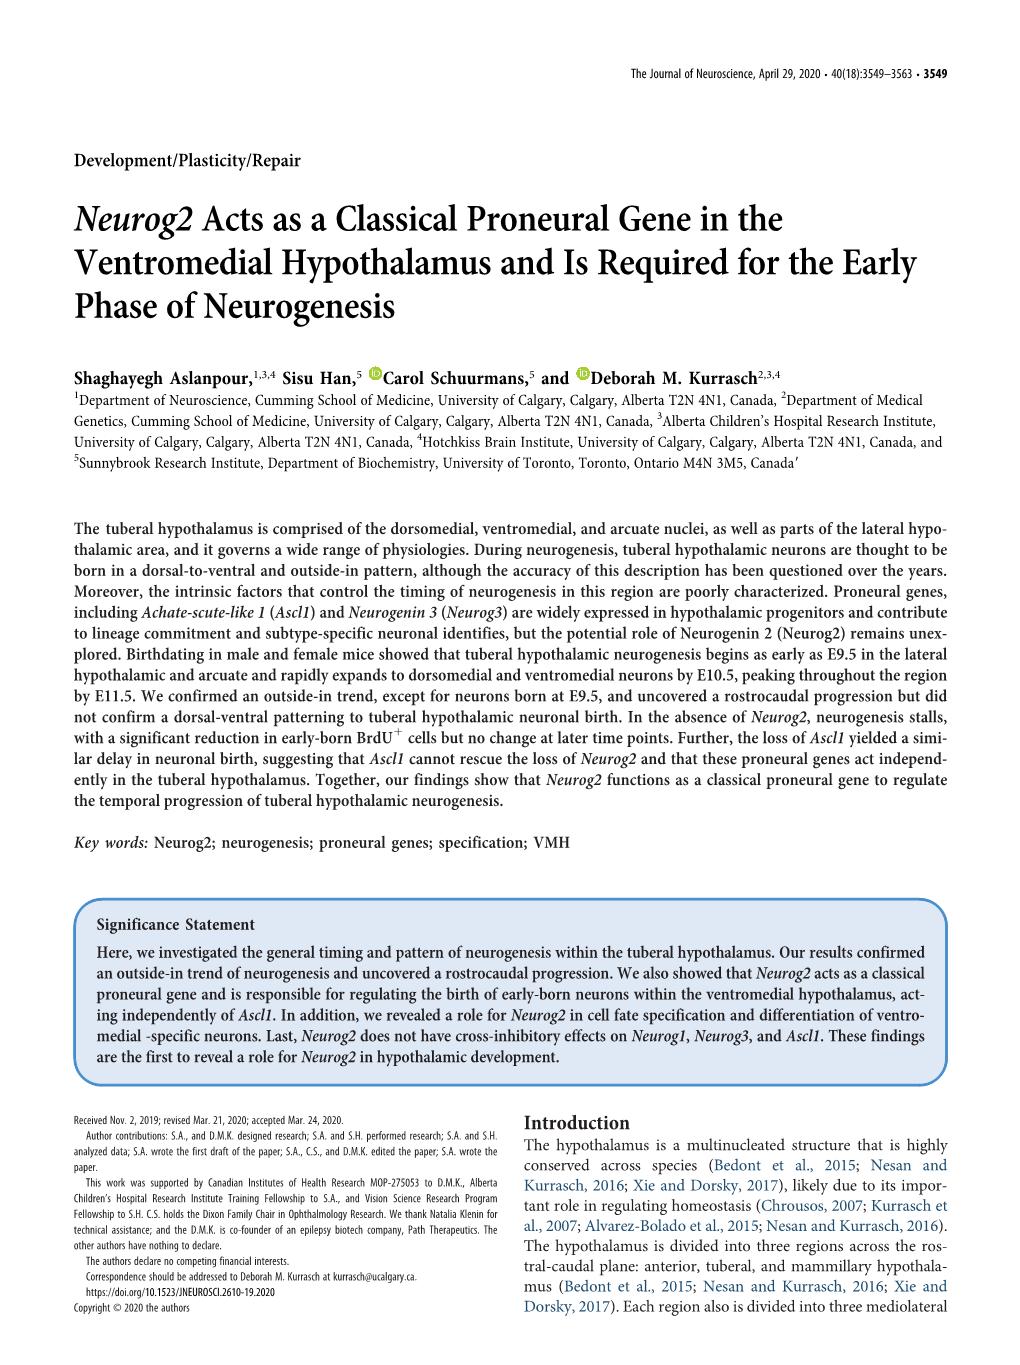 Neurog2 Acts As a Classical Proneural Gene in the Ventromedial Hypothalamus and Is Required for the Early Phase of Neurogenesis